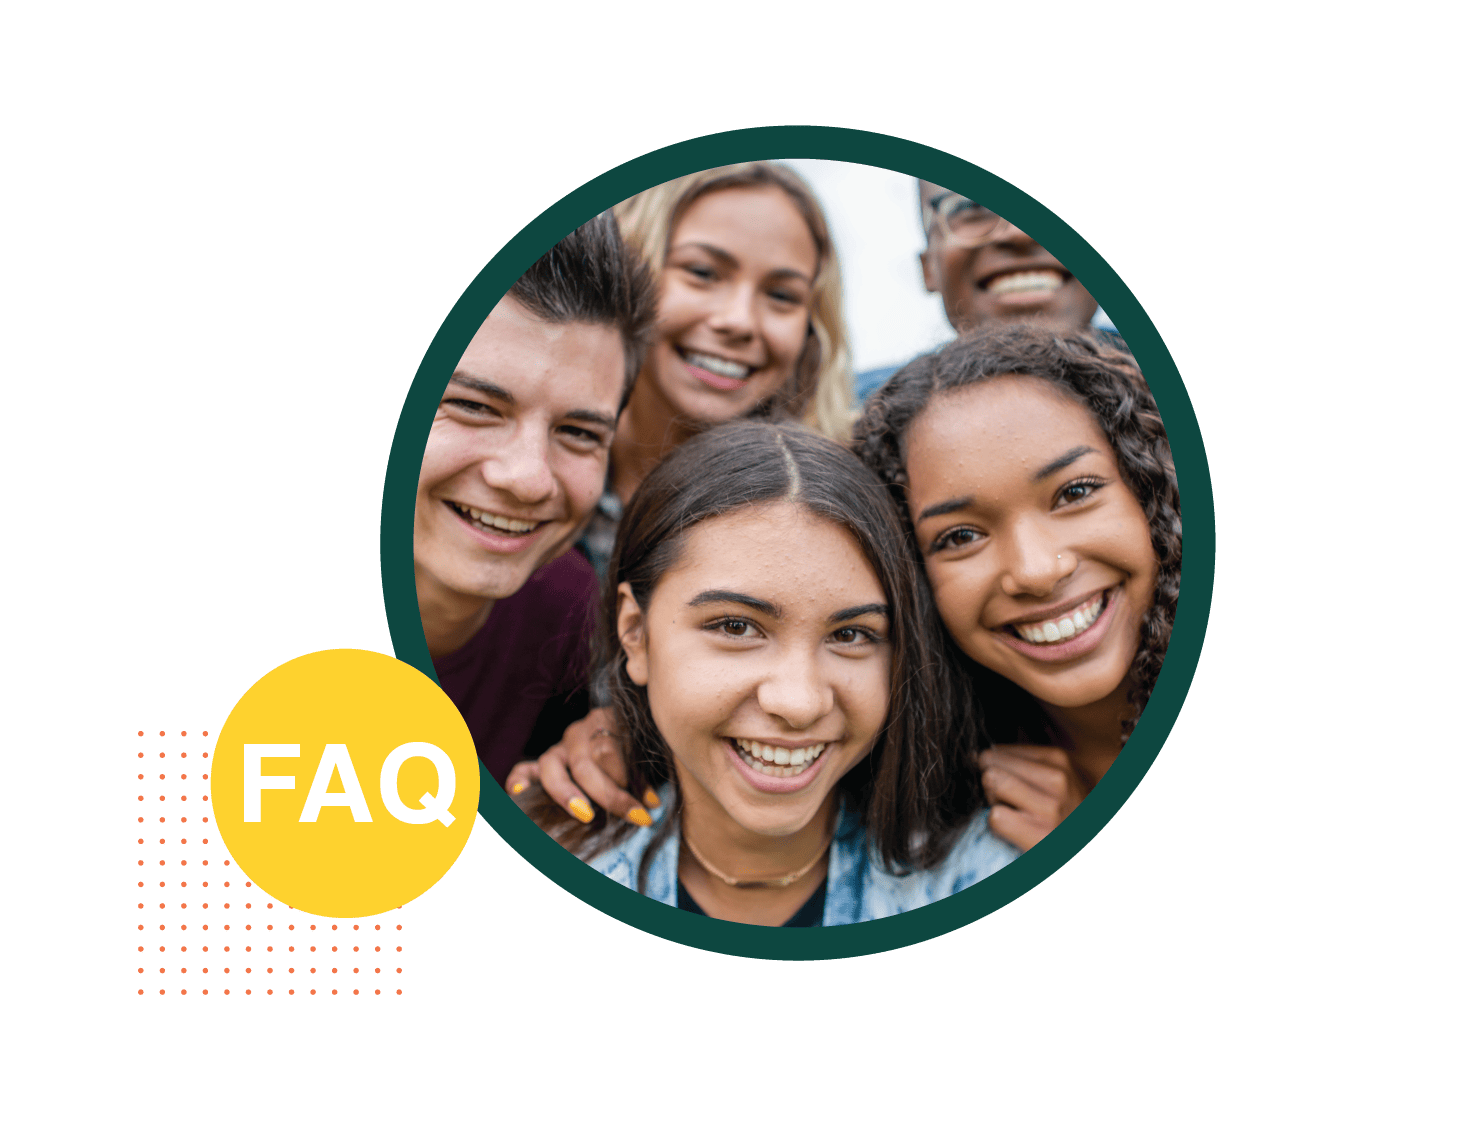 FAQ - Group of students smiling